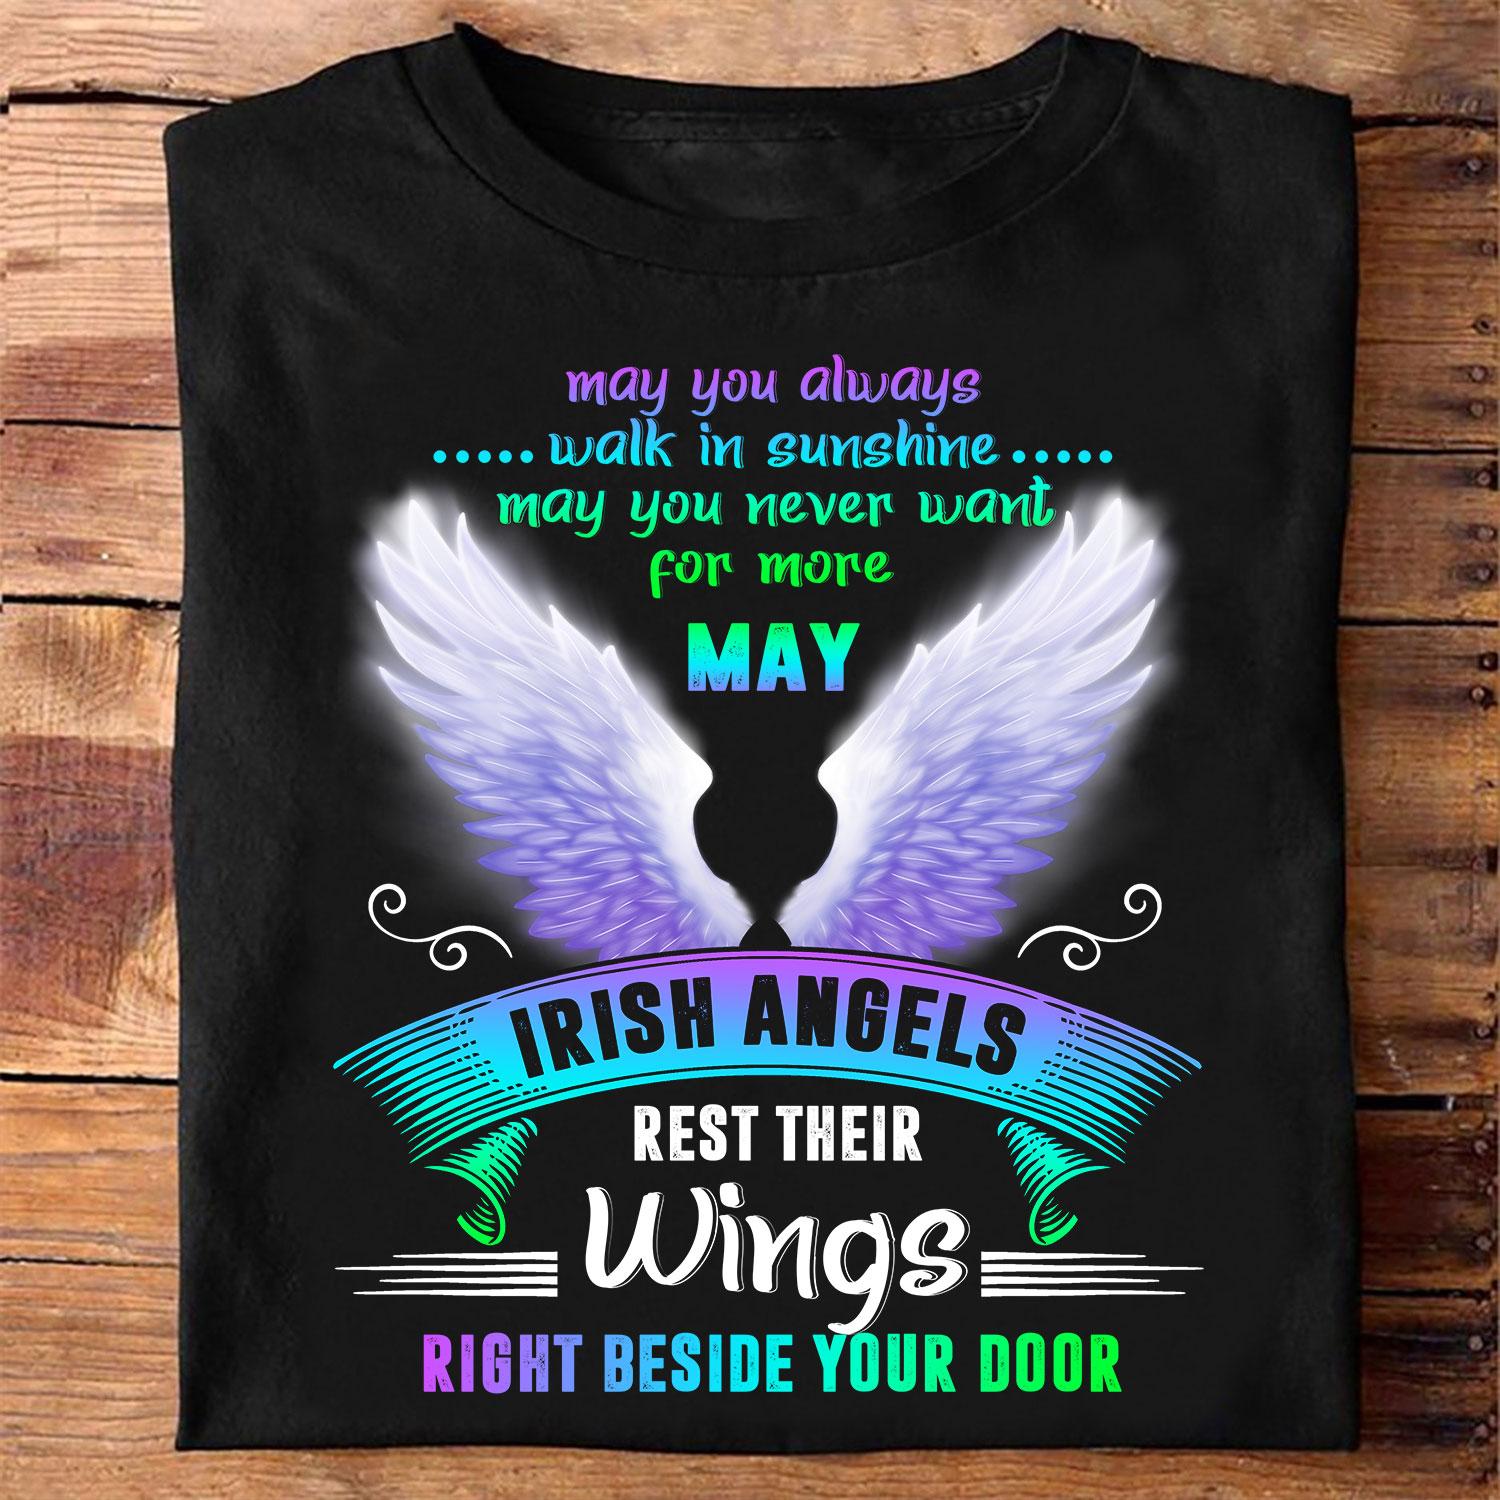 May you always walk in sunshine ​may you never want for more may irish angels rest their wings right beside your doo